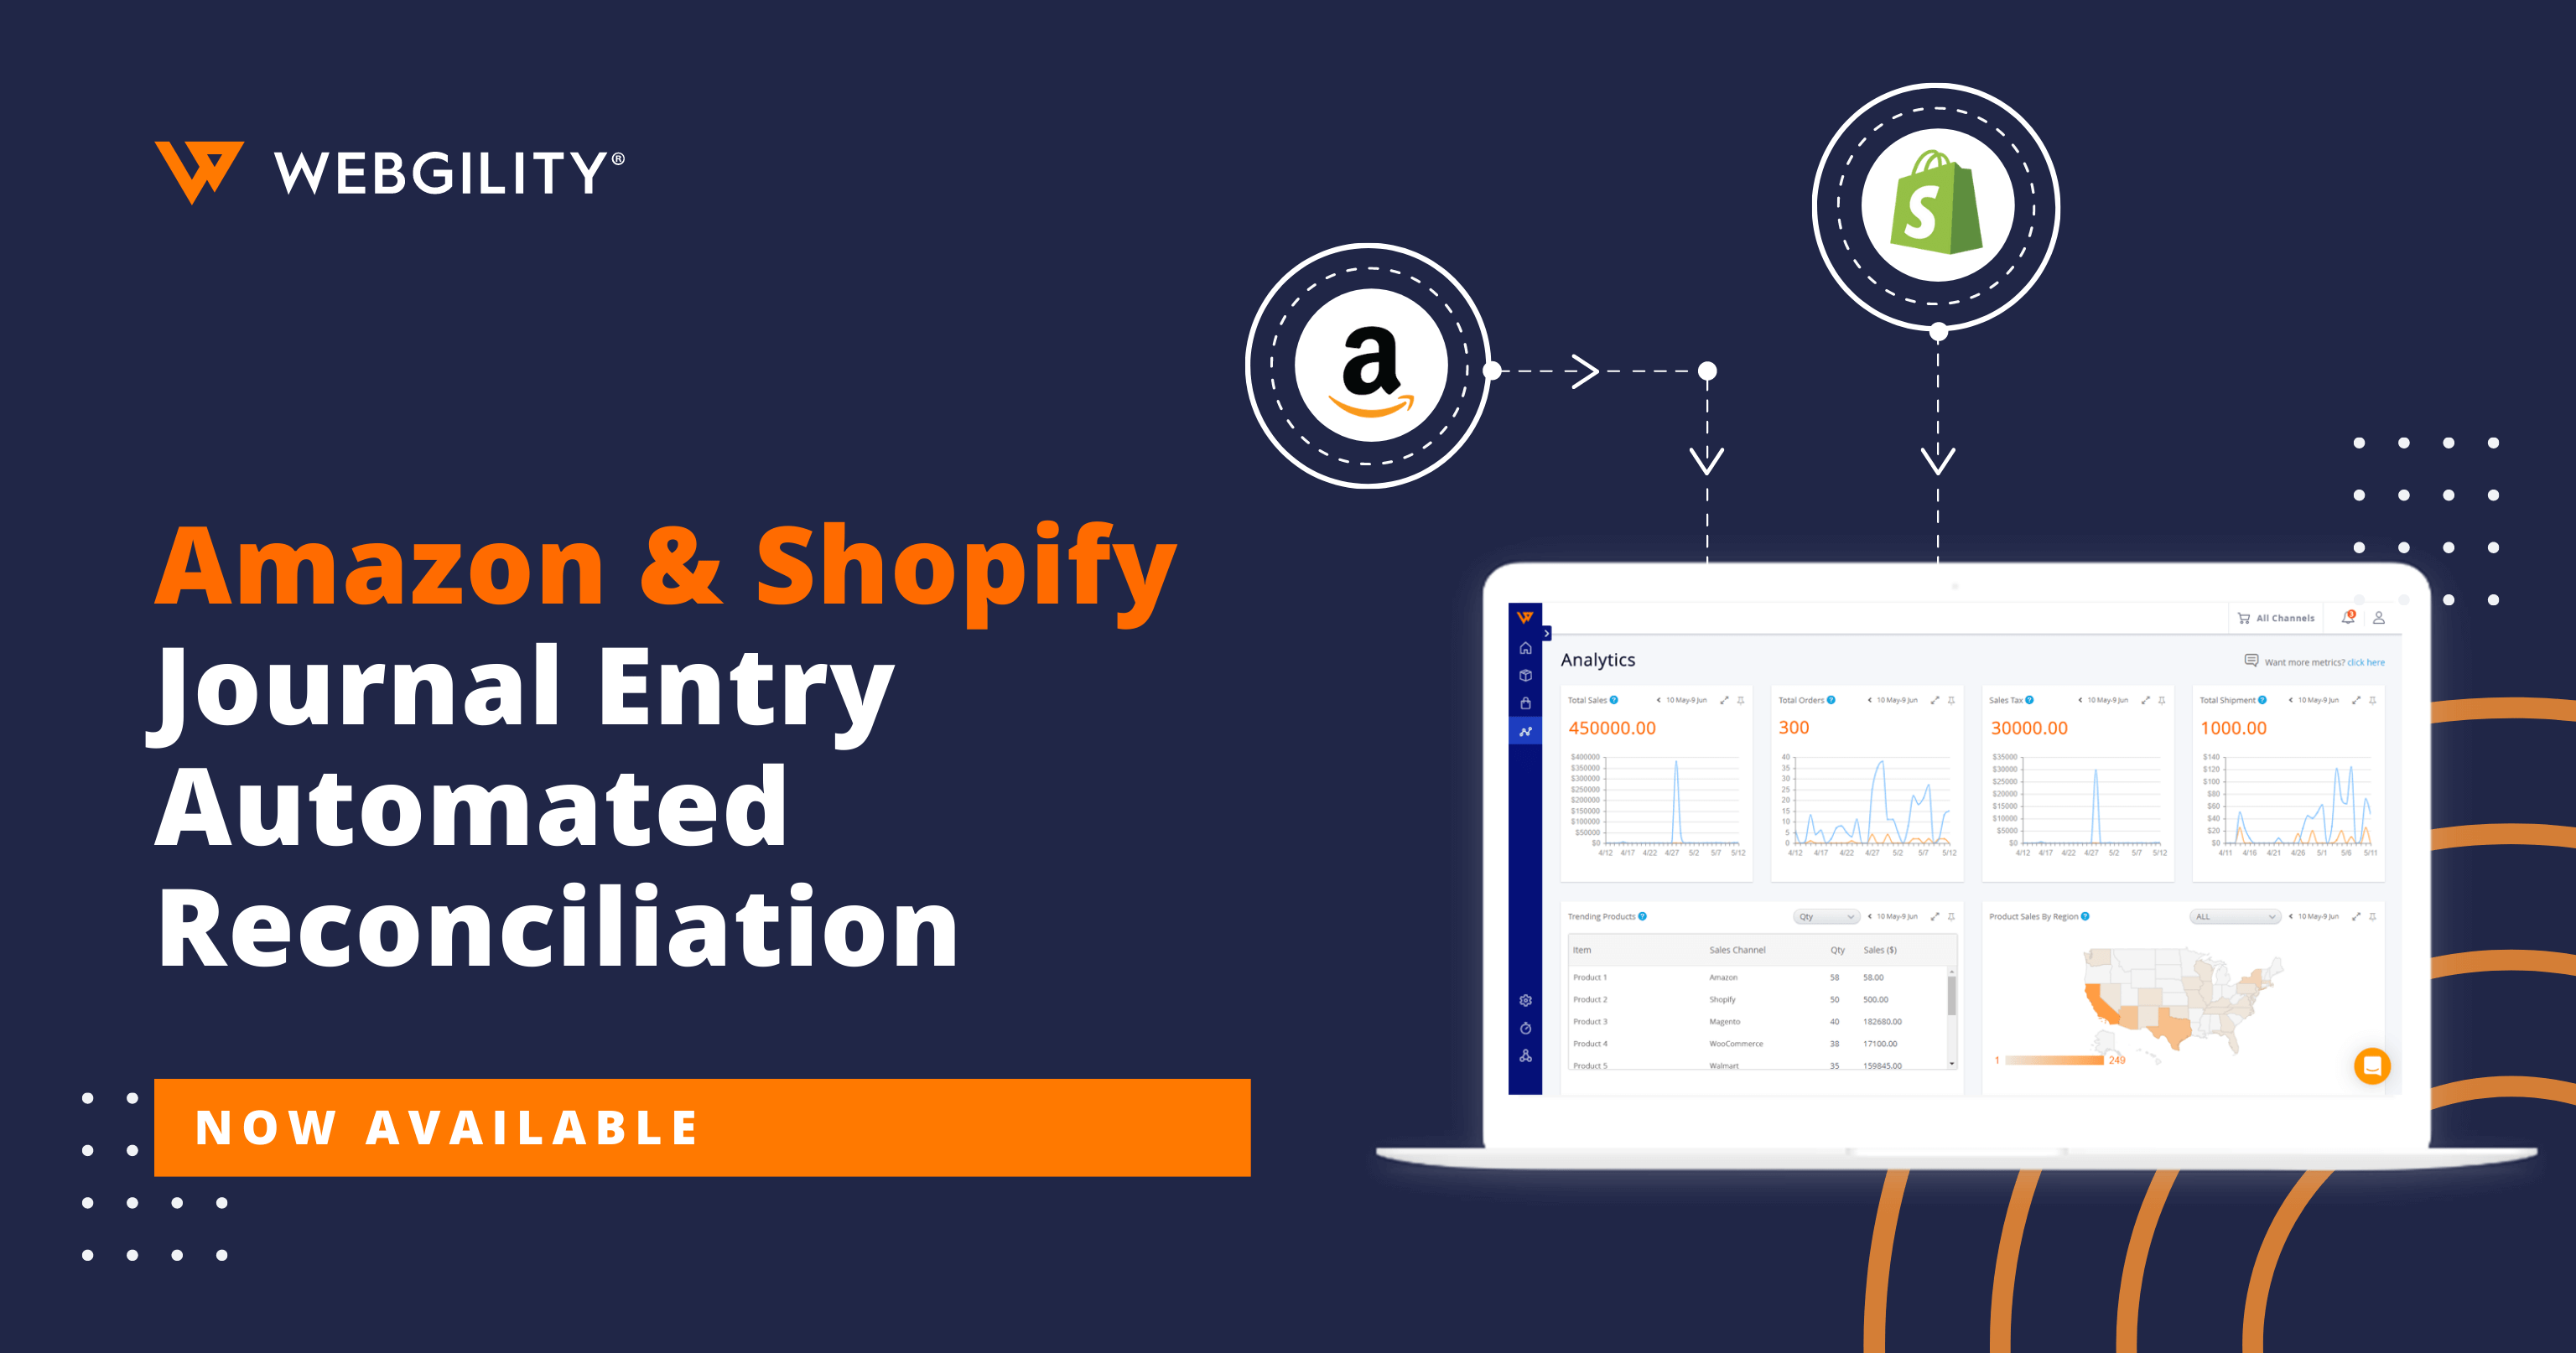 Announcing: Amazon & Shopify Journal Entry Reconciliation